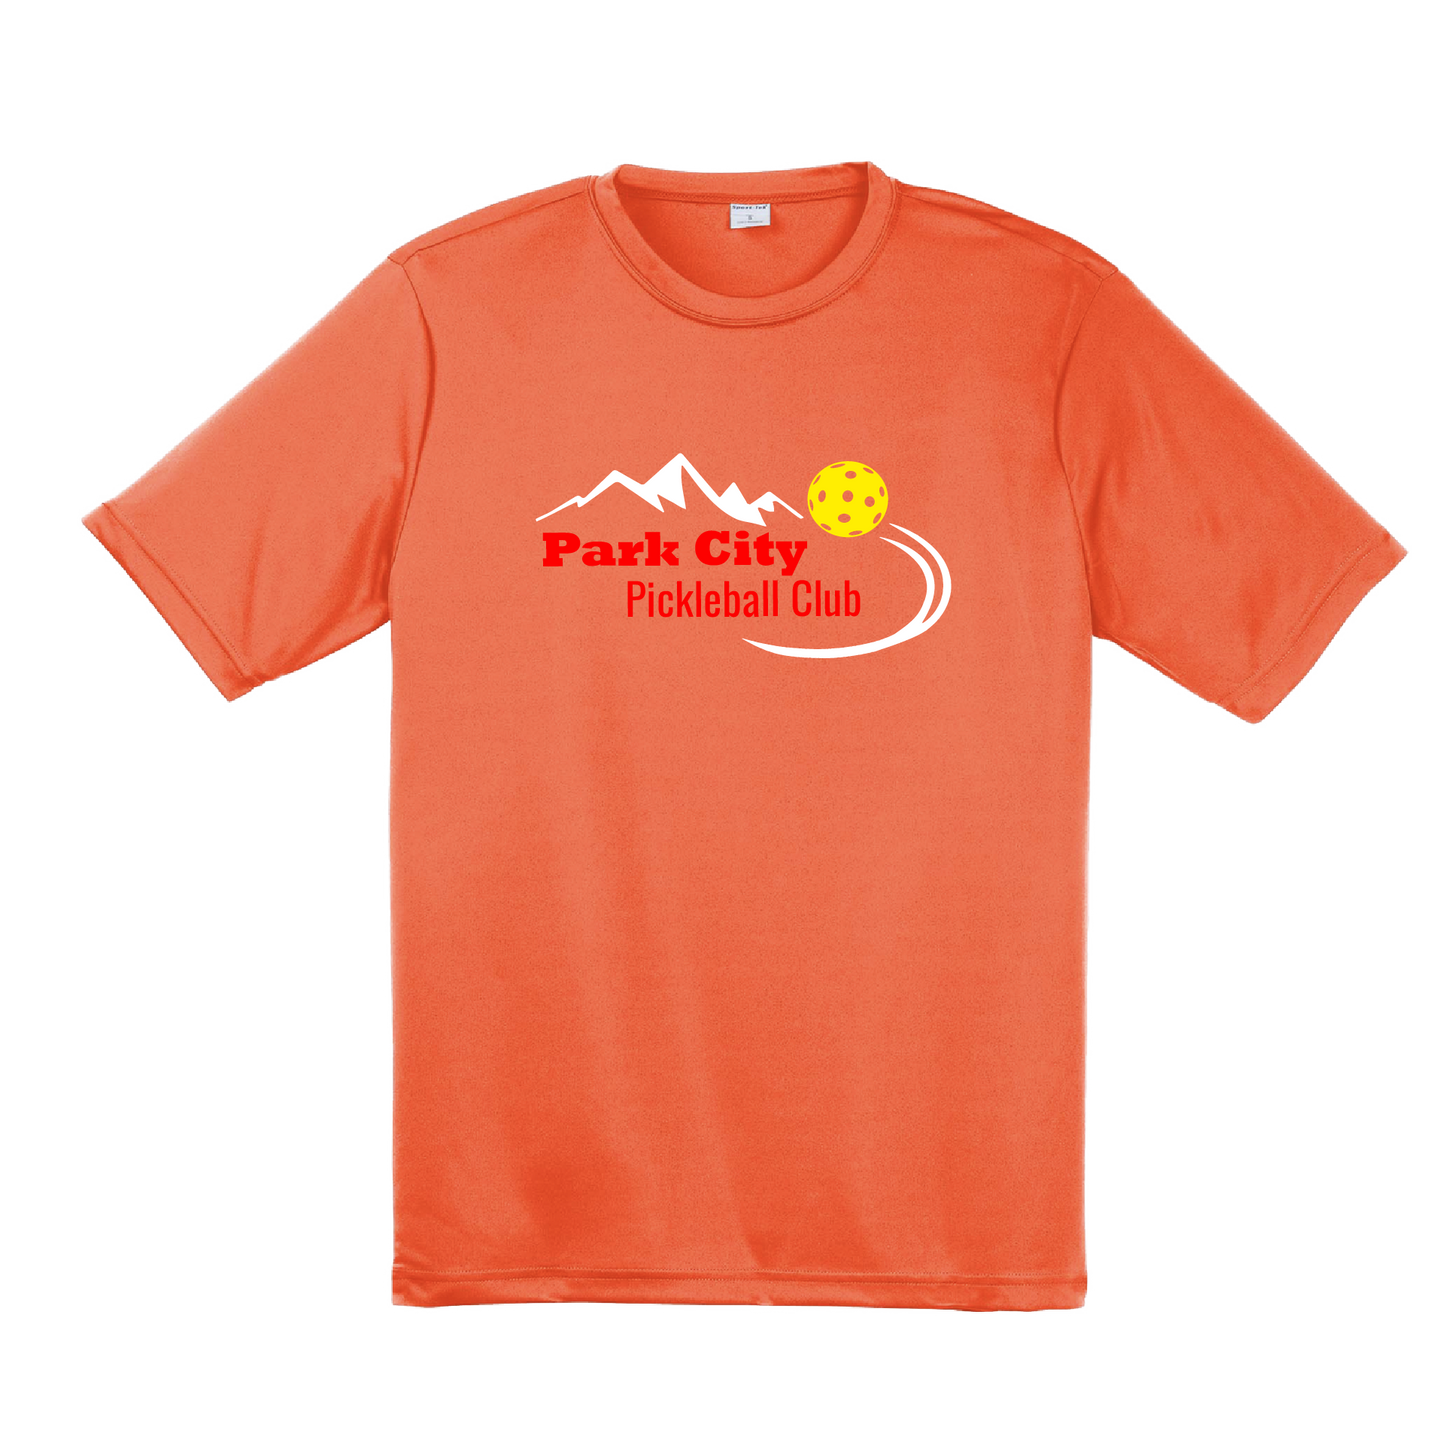 Pickleball Design: Park City Pickleball Club (red words)  Men's Style: Short Sleeved   Shirts are lightweight, roomy and highly breathable. These moisture-wicking shirts are designed for athletic performance. They feature PosiCharge technology to lock in color and prevent logos from fading. Removable tag and set-in sleeves for comfort.